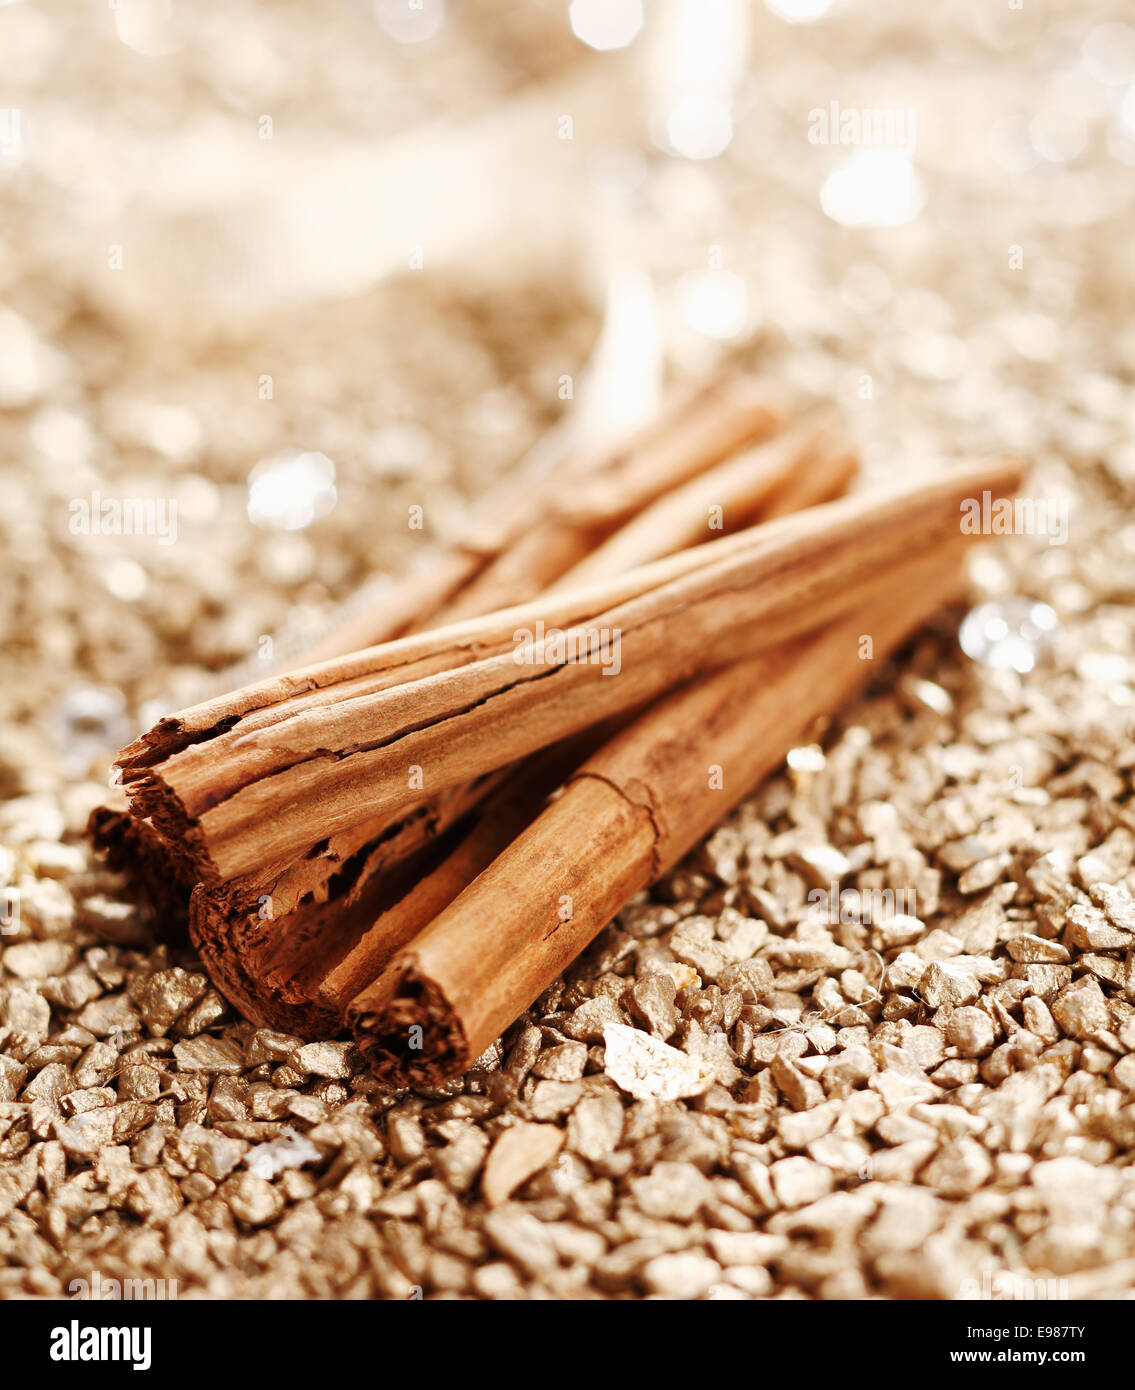 Some Cinnamon Sticks on a shiny golden background for wintery food concepts Stock Photo